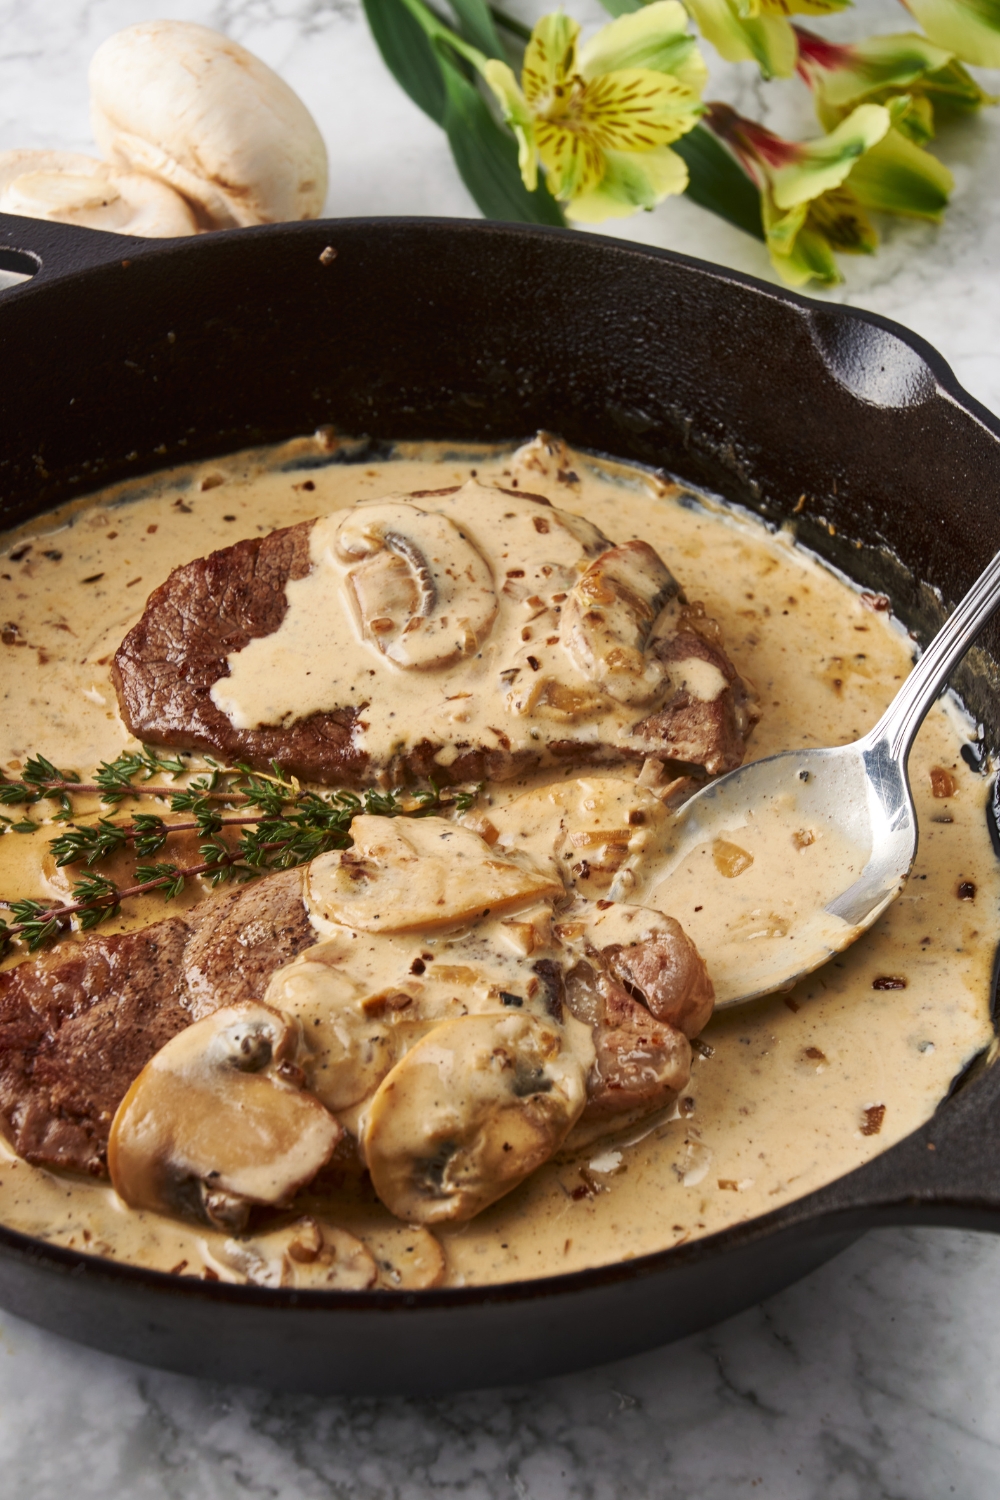 Two seared filet mignon steaks being covered in a brown mushroom sauce with a spoon.